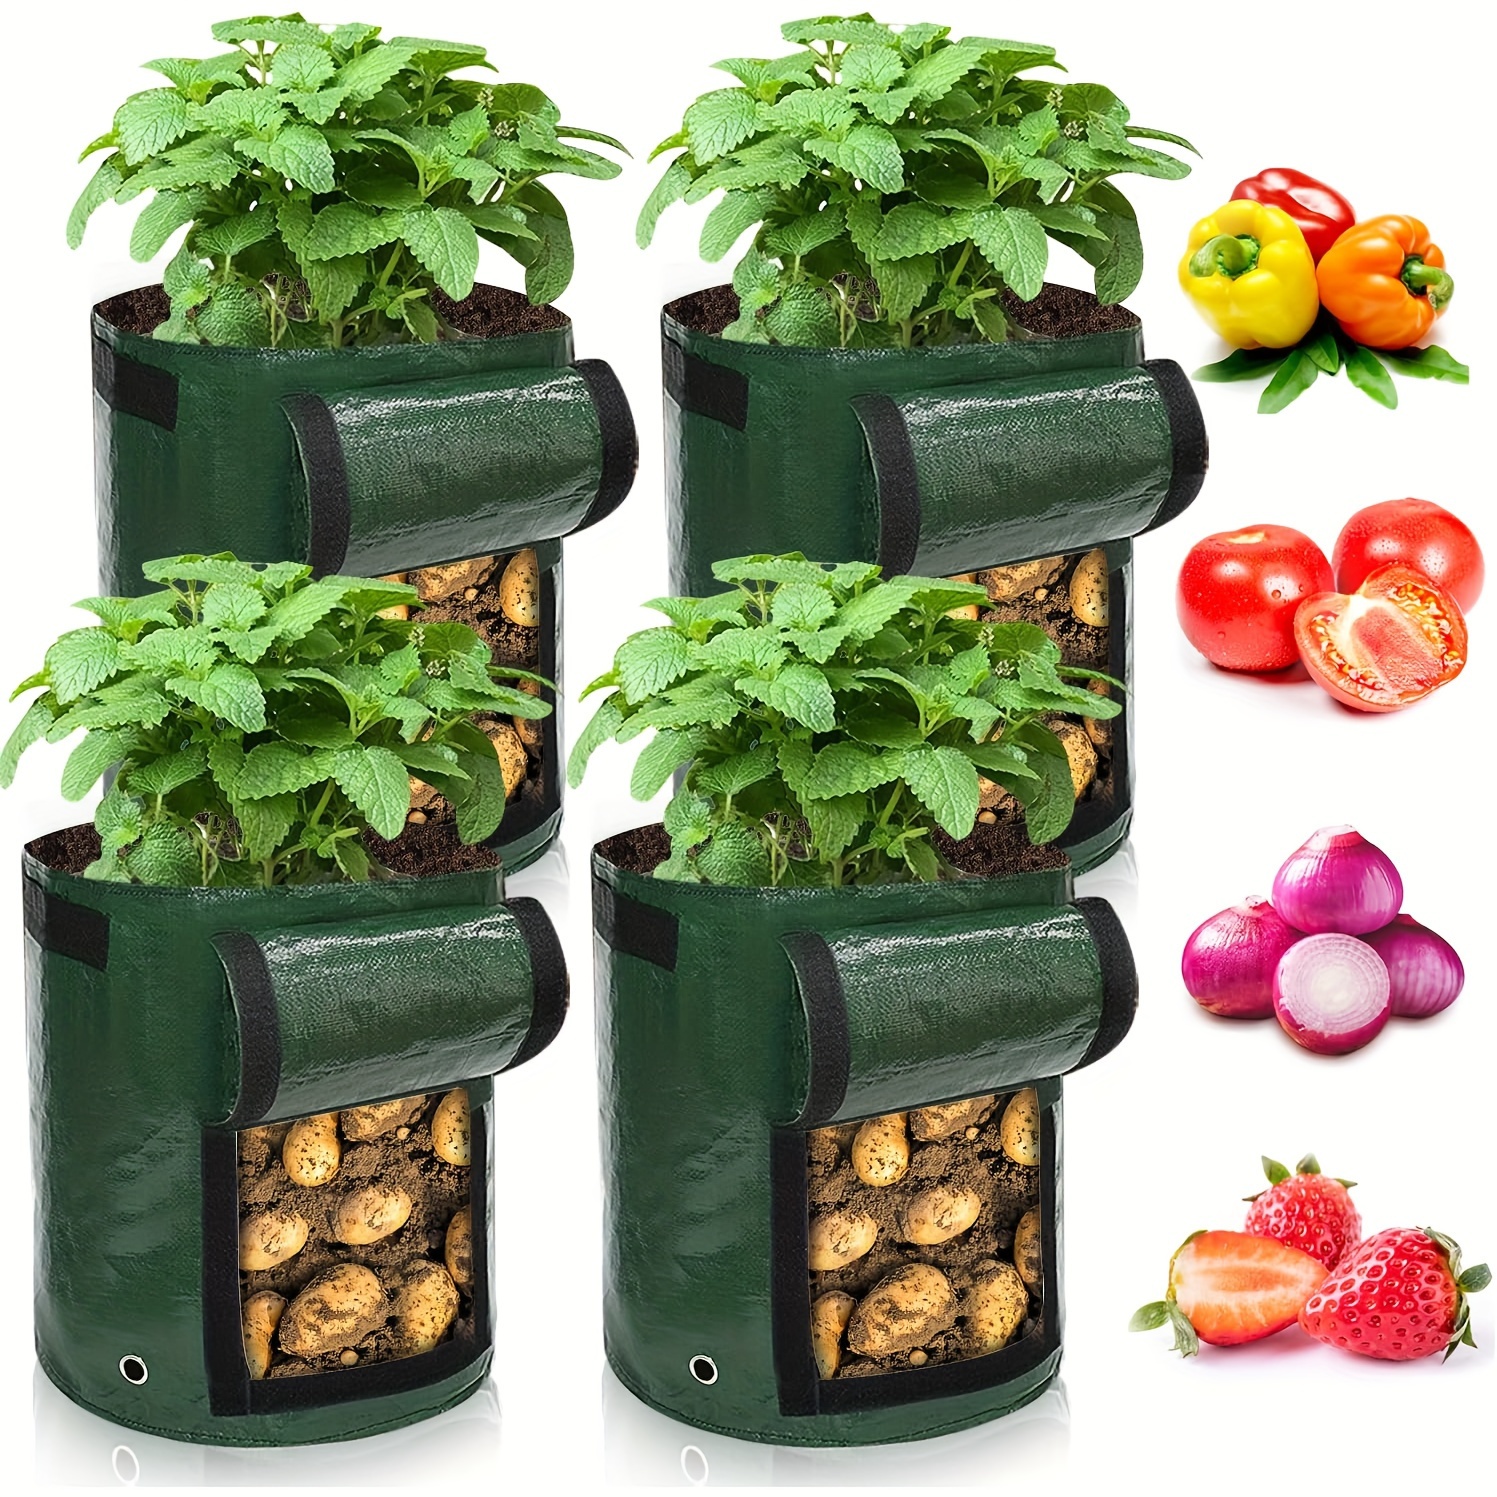 

4 Packs, 10 Gallon Garden Planting Bags, Durable Aeration Fabric Pots With Handles And View Flap, Reusable Heavy-duty Containers For Potatoes, Onions, Carrots, Fruits, Tomatoes - Green